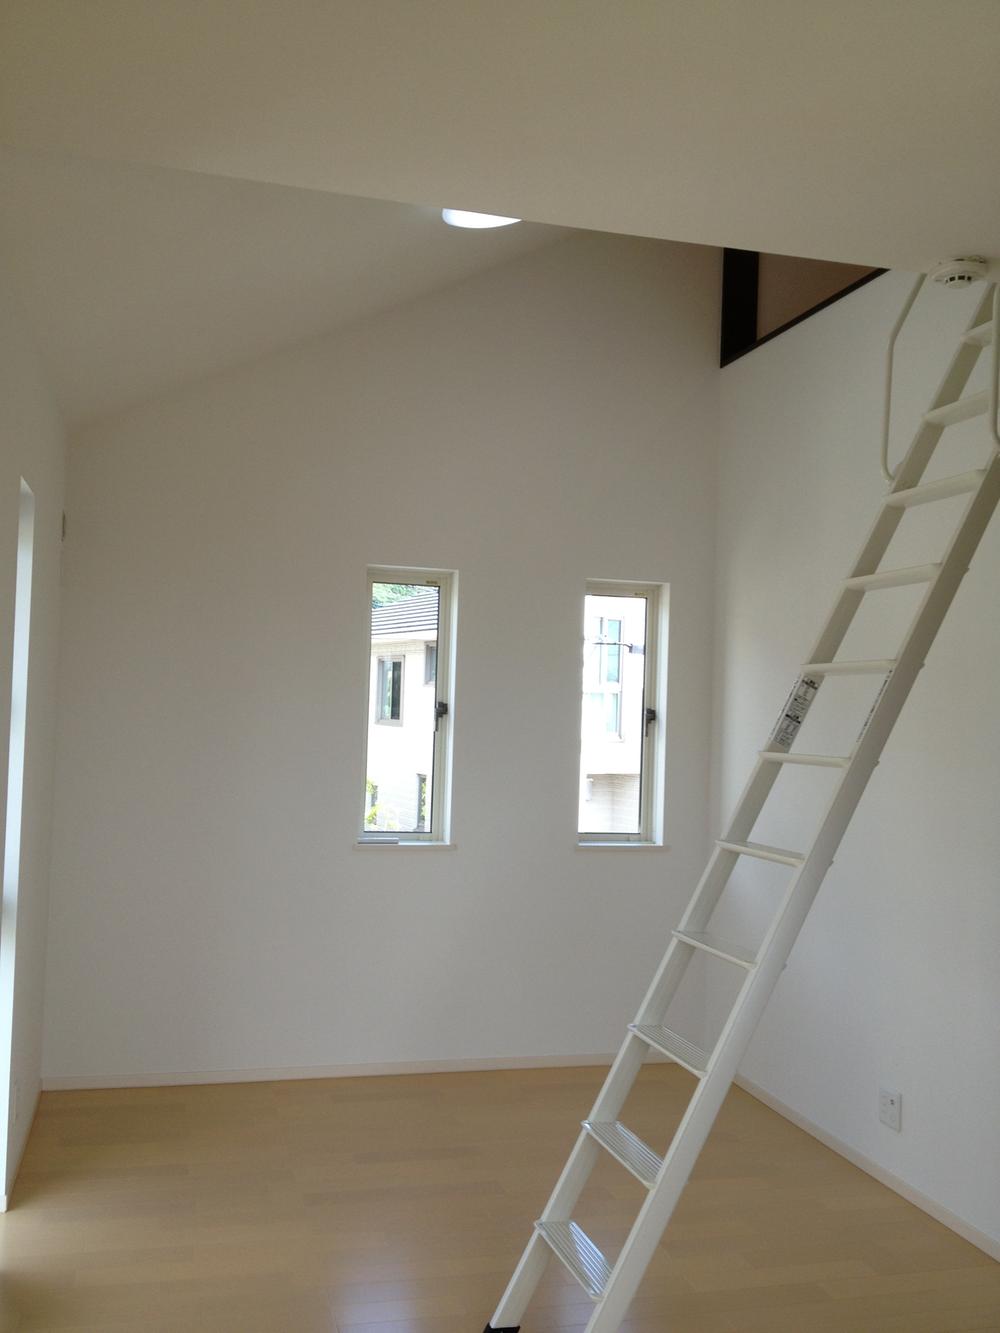 Other. Children room, A feeling of freedom continues to slope ceiling and 3 pledge worth of loft is a fixed ladder.